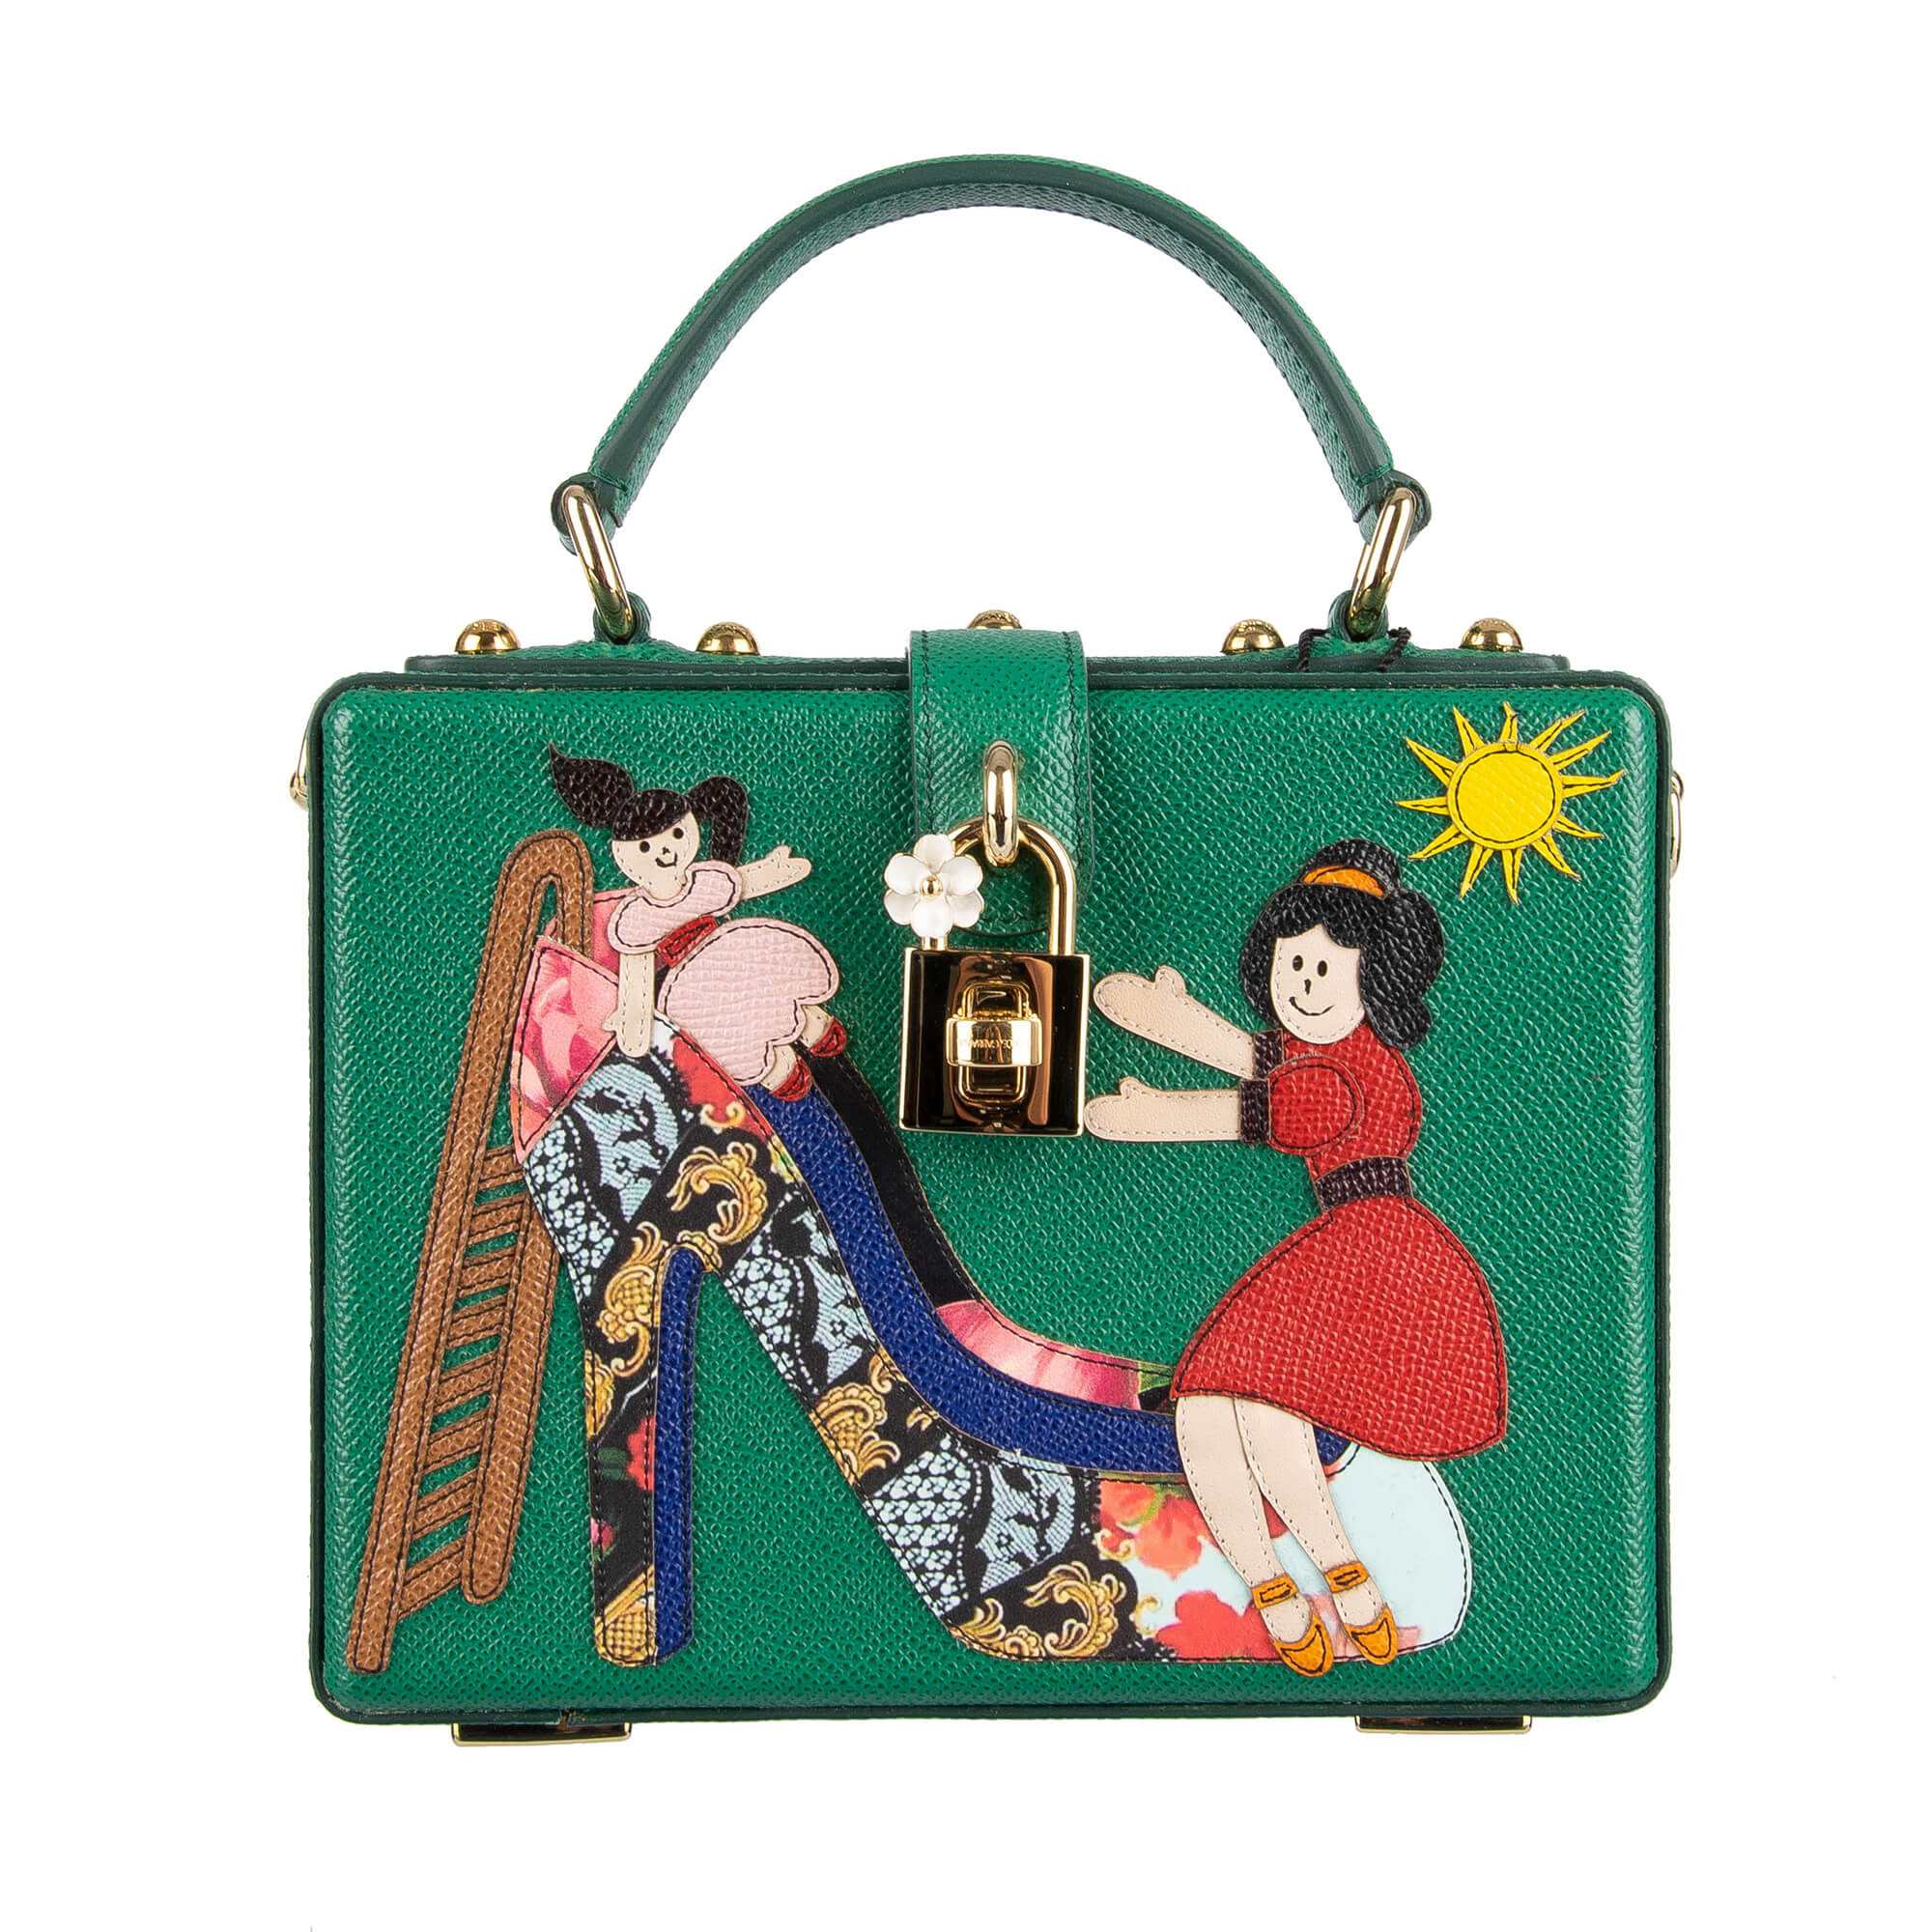 Dolce & Gabbana Dauphine Leather Bag DOLCE BOX with Family Motif